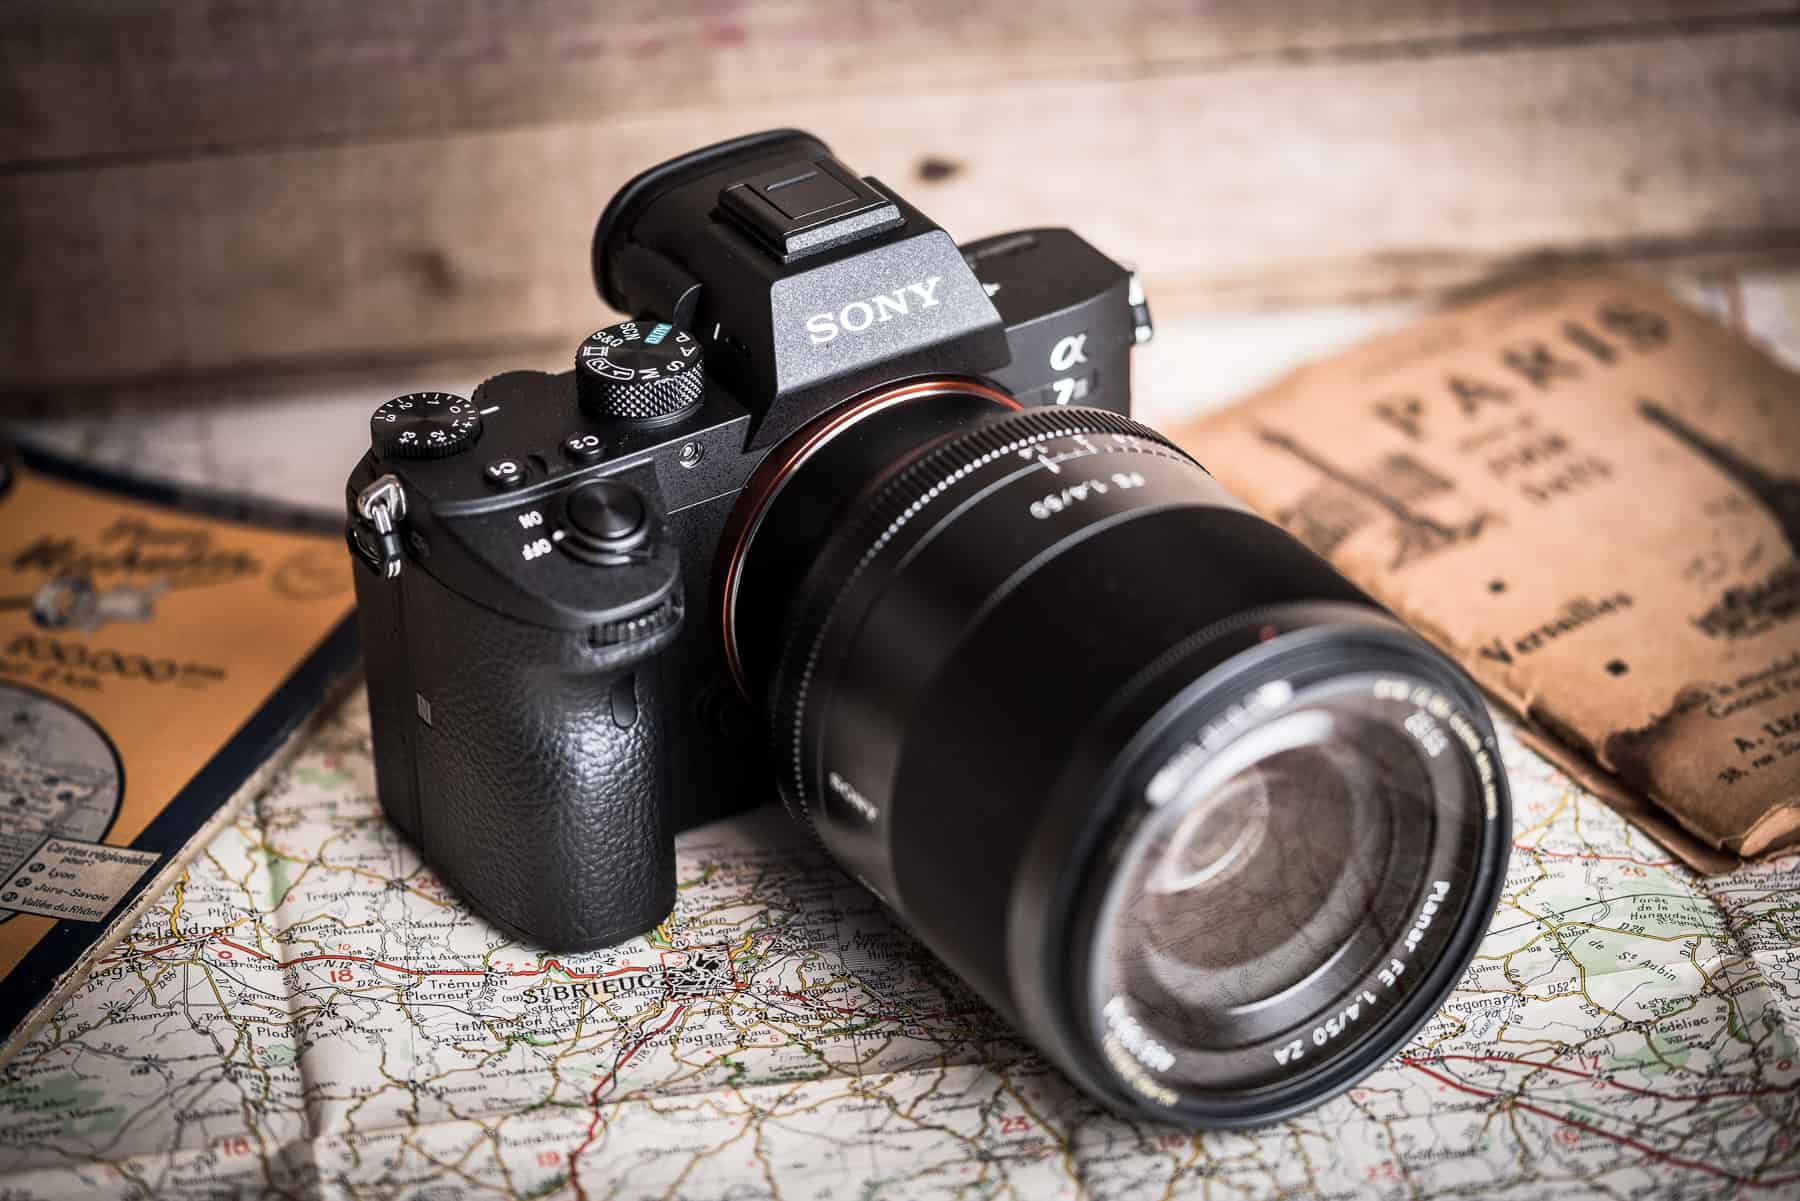 Best Rated Professional Digital Cameras in Nigeria nigeriantech.com.ng